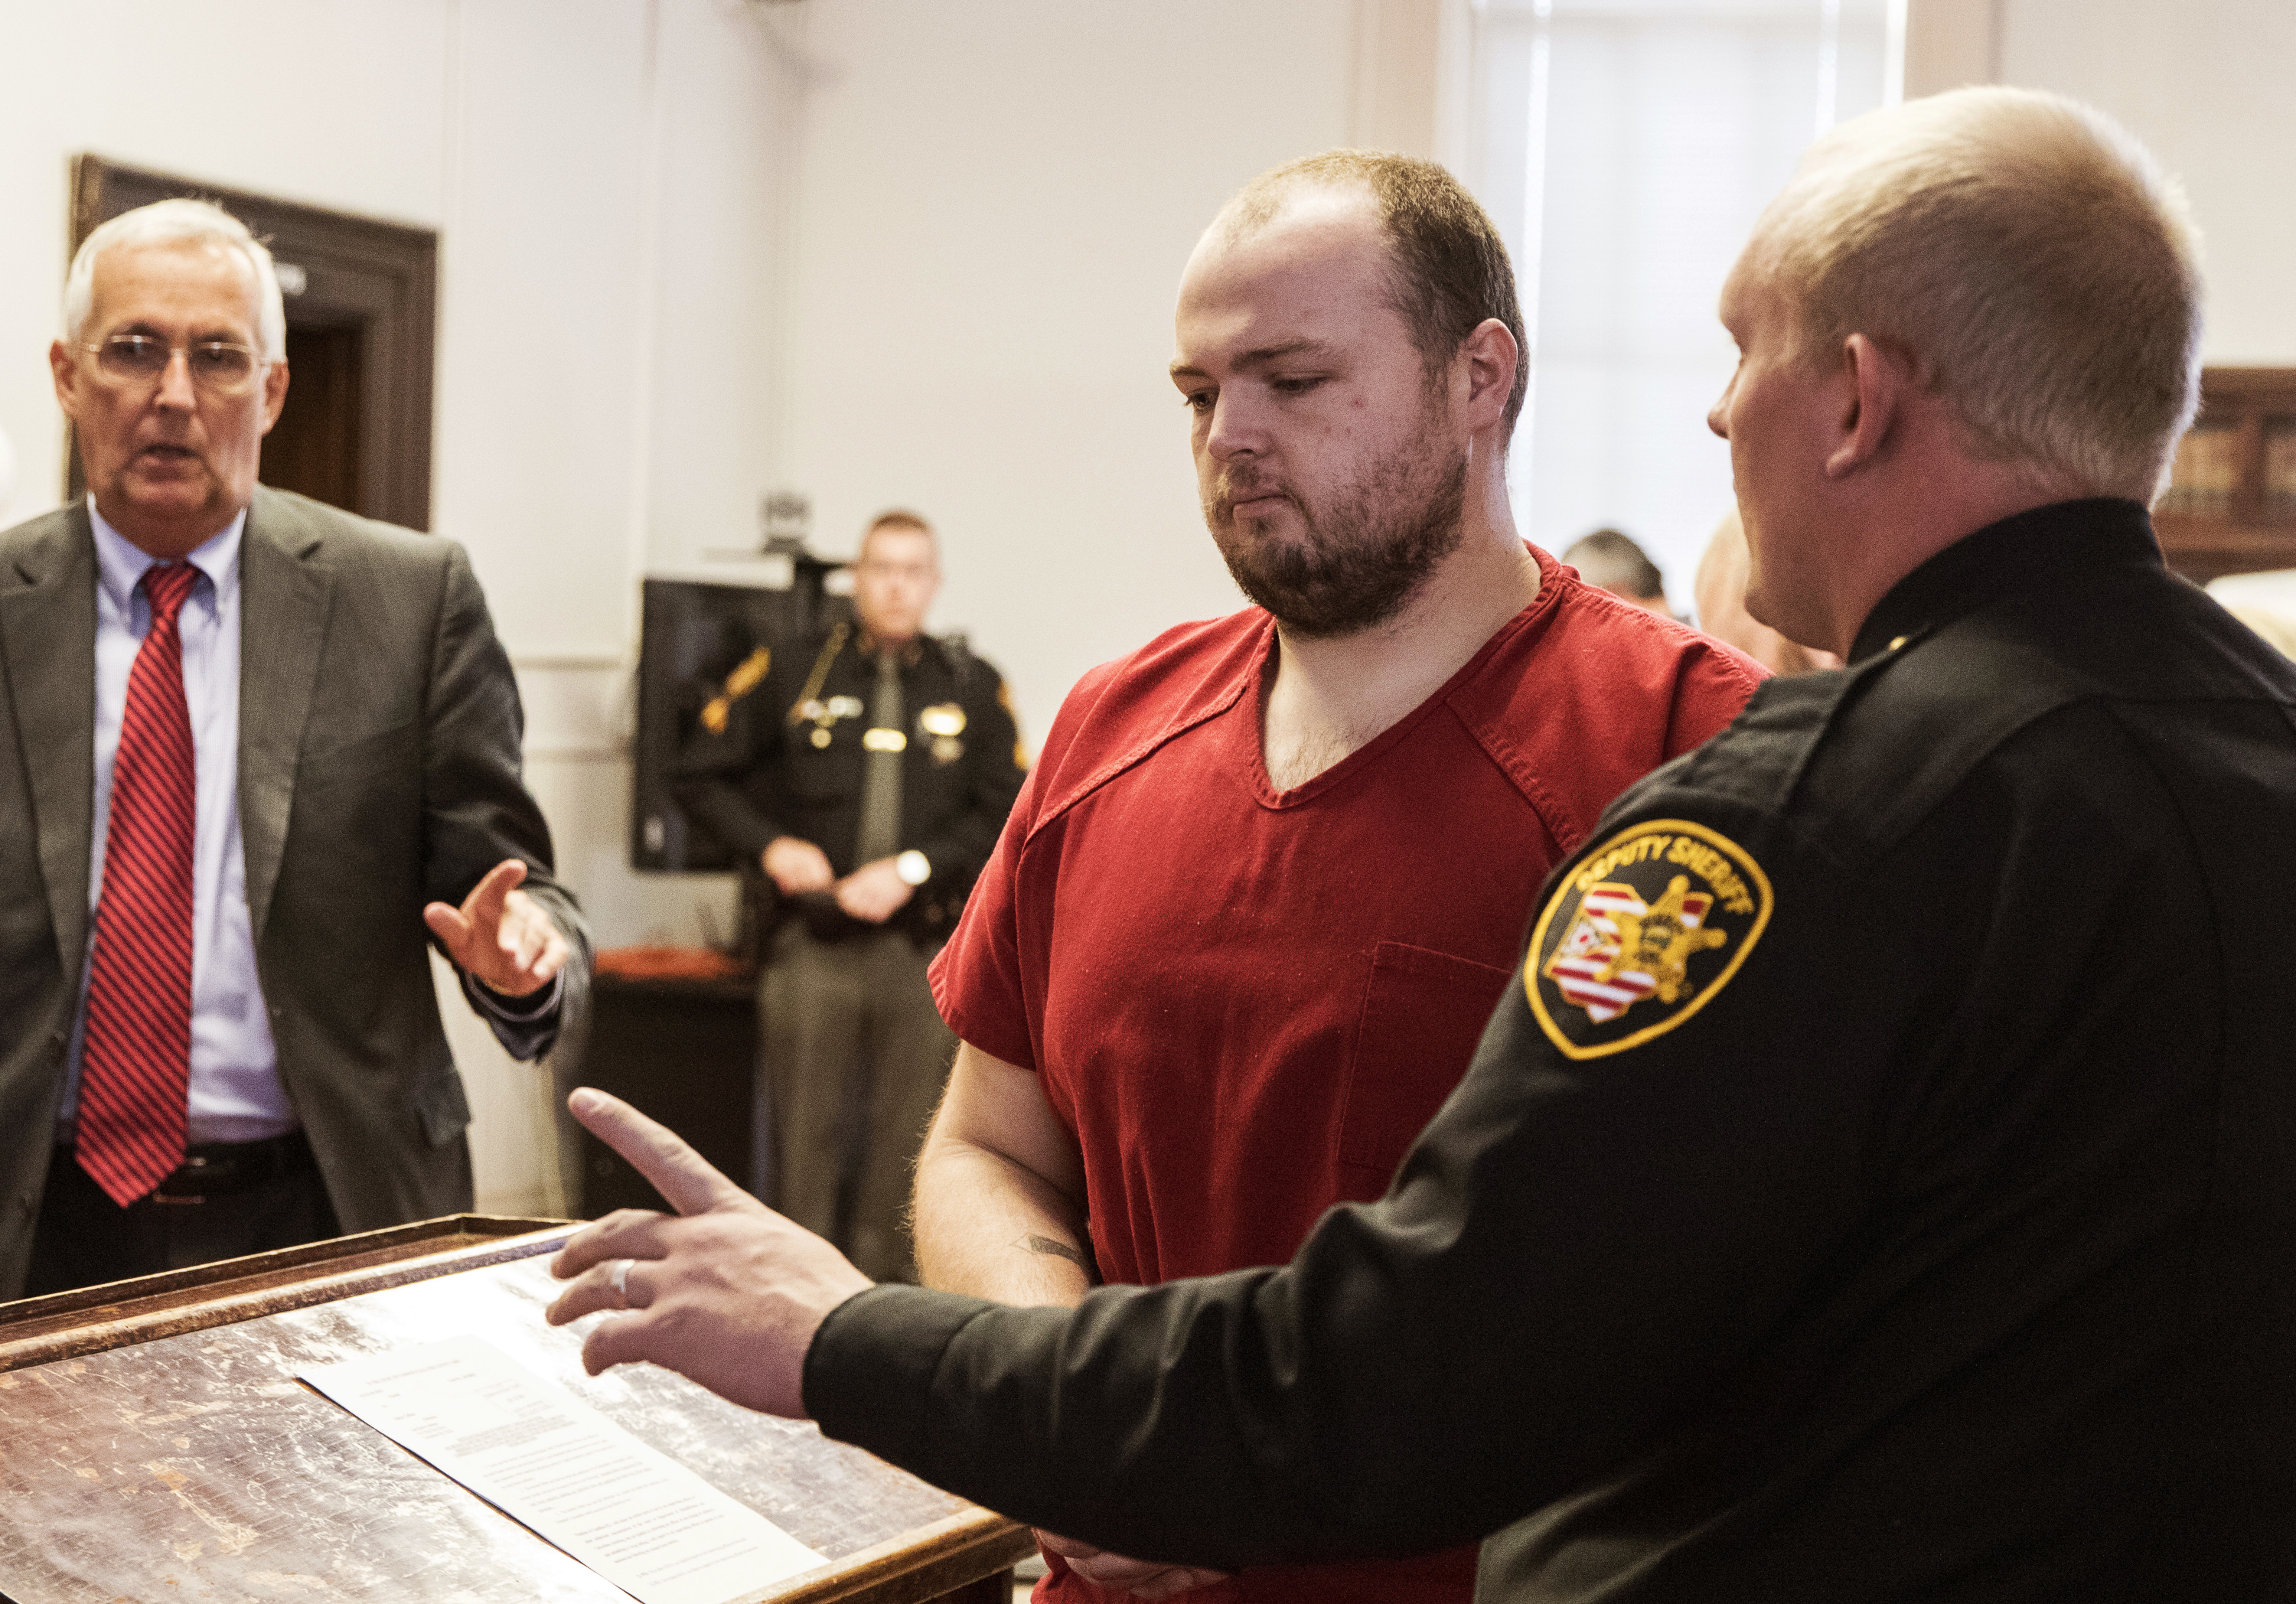 Trial for Pike County murder suspect George 'Billy' Wagner not